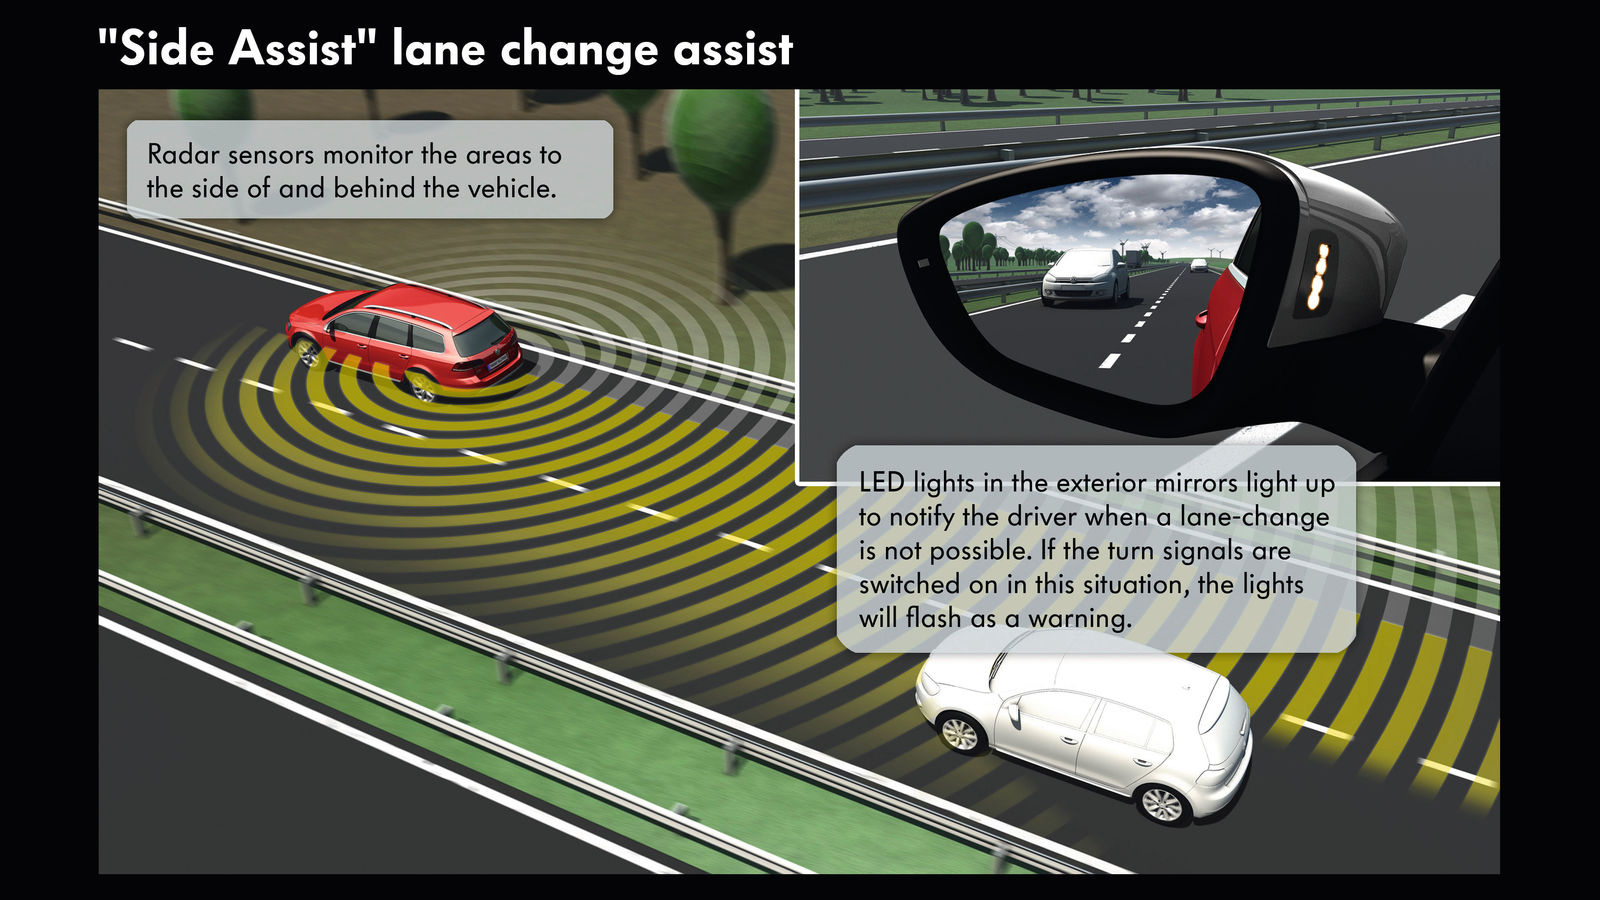 Radar sensors monitor the areas to the side of and behind the vehicle. LED lights in the exterior mirrors light up to notify the driver when a lane-change is not possible. If the turn signals are switched on in this situation, the lights will flash as a warning.